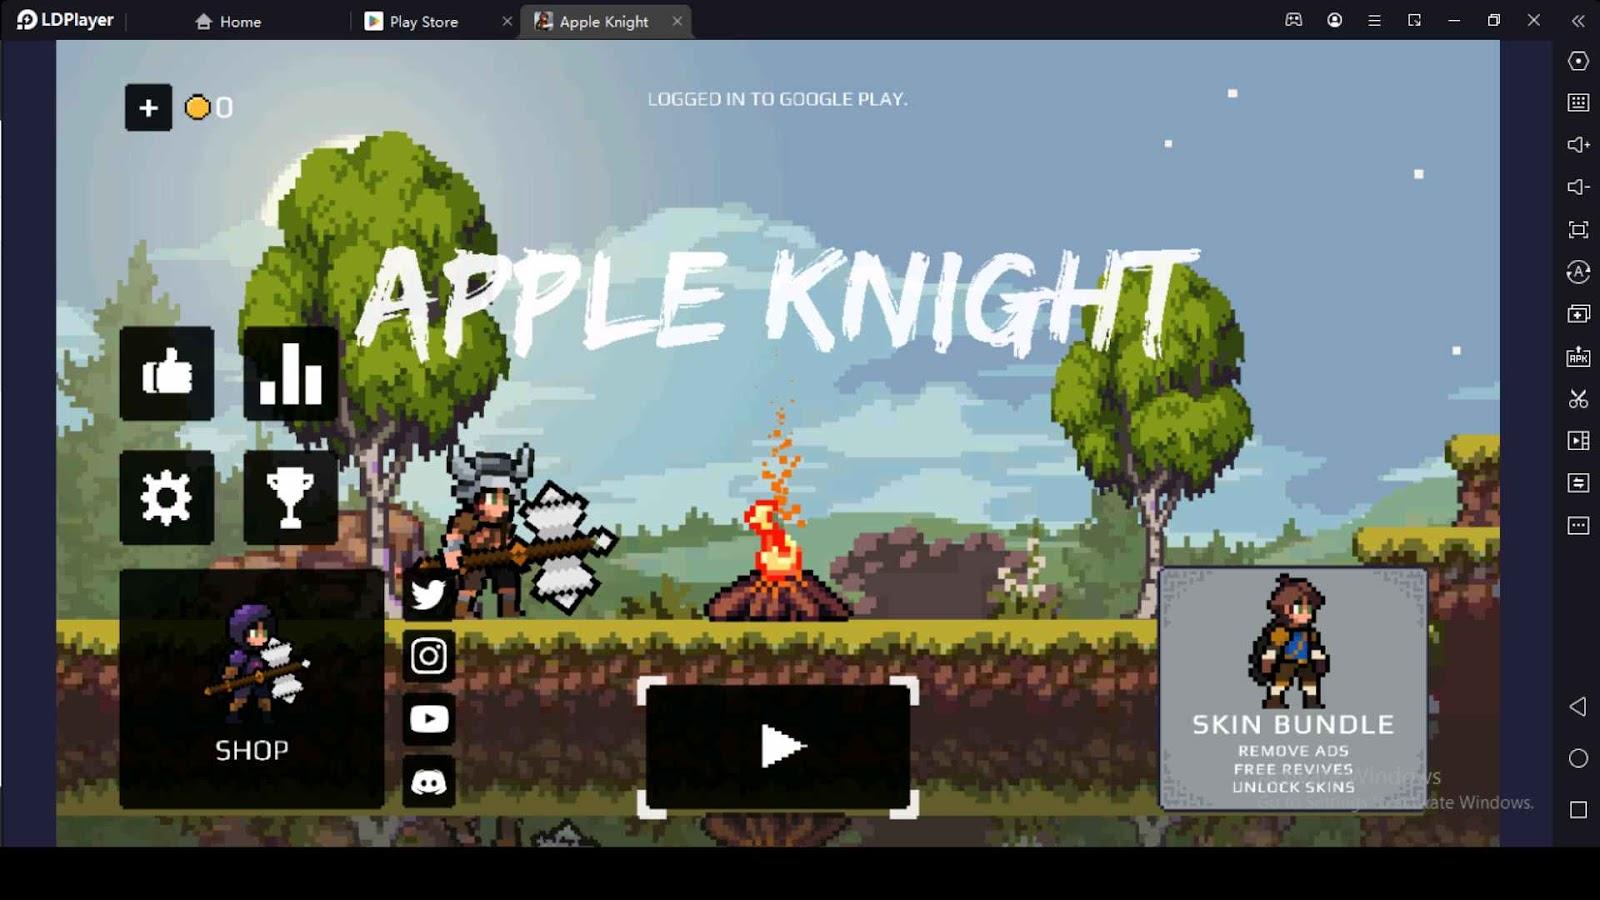 Apple Knight Action Platformer Beginner Guide with Tips for the Endless Adventure